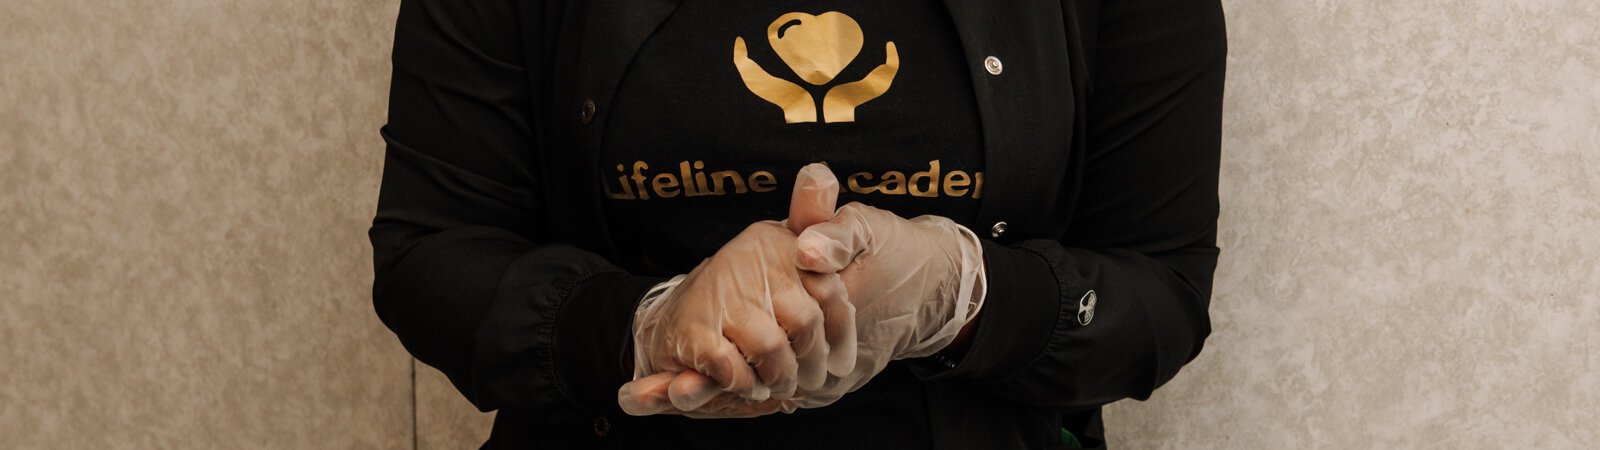 Student Ja'Lona Franklin puts on gloves while at Lifeline Academy, 1615 East Wallace Street, Fort Wayne, Indiana, 46803.